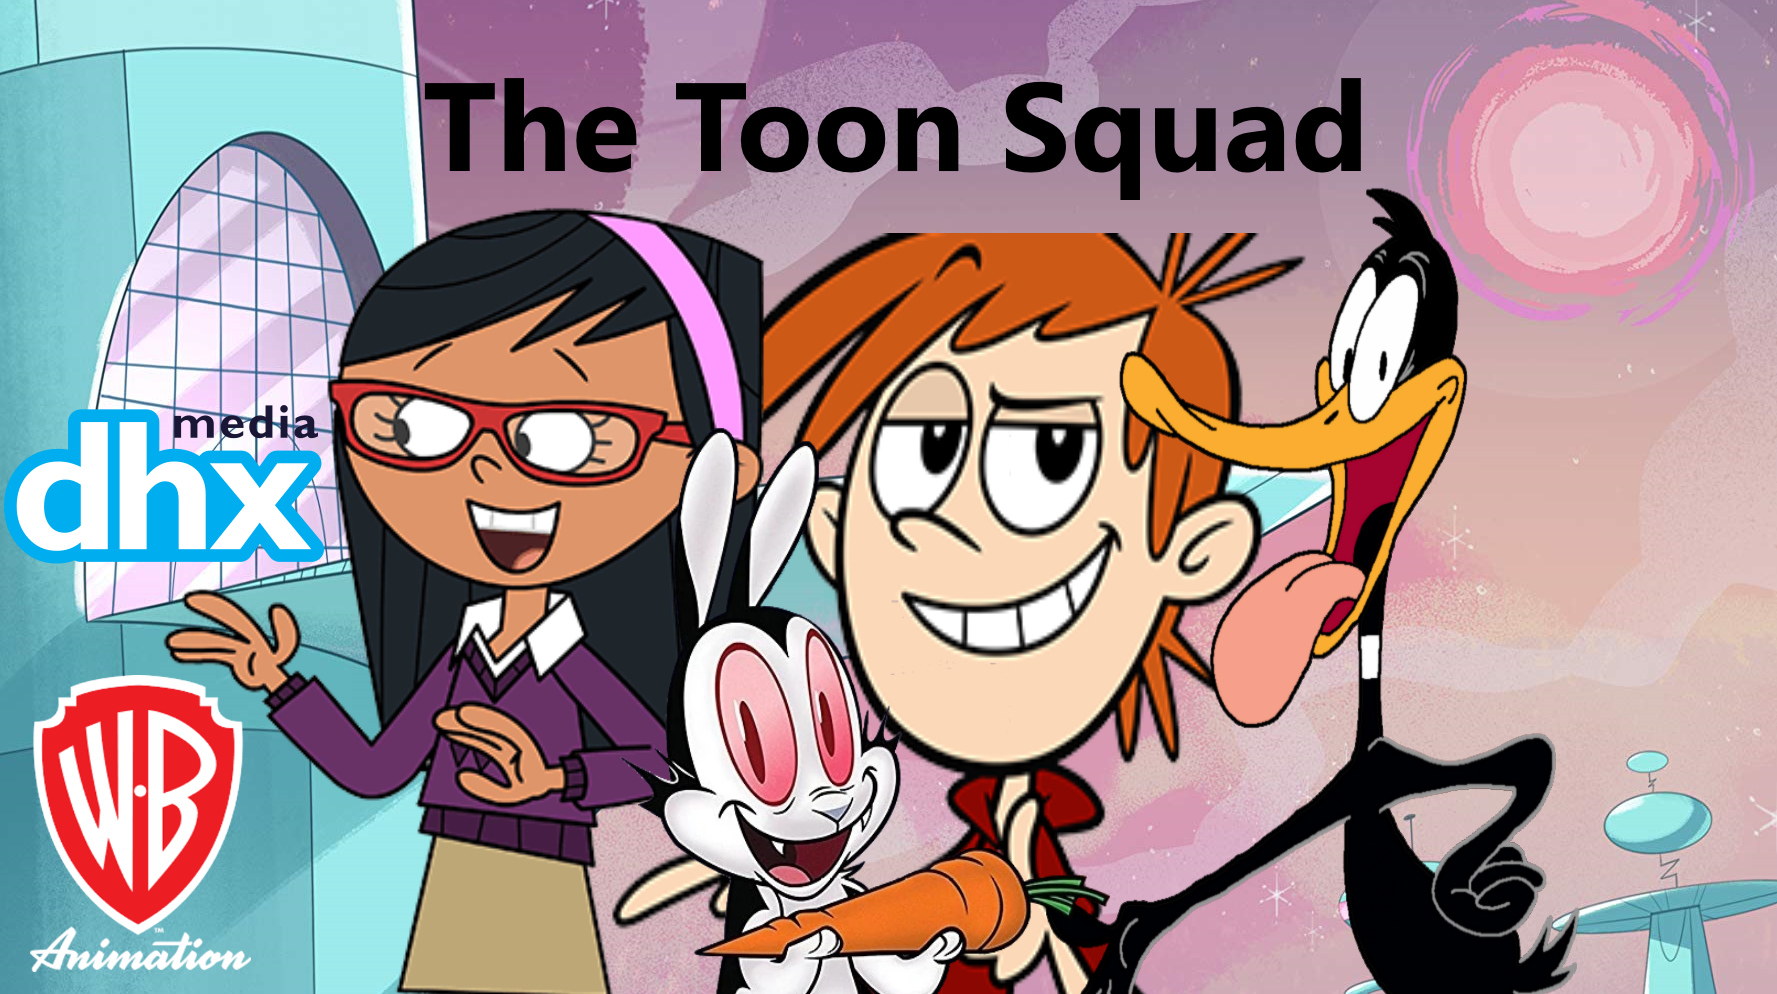 The Toon Squad, The Toon Squad Wiki